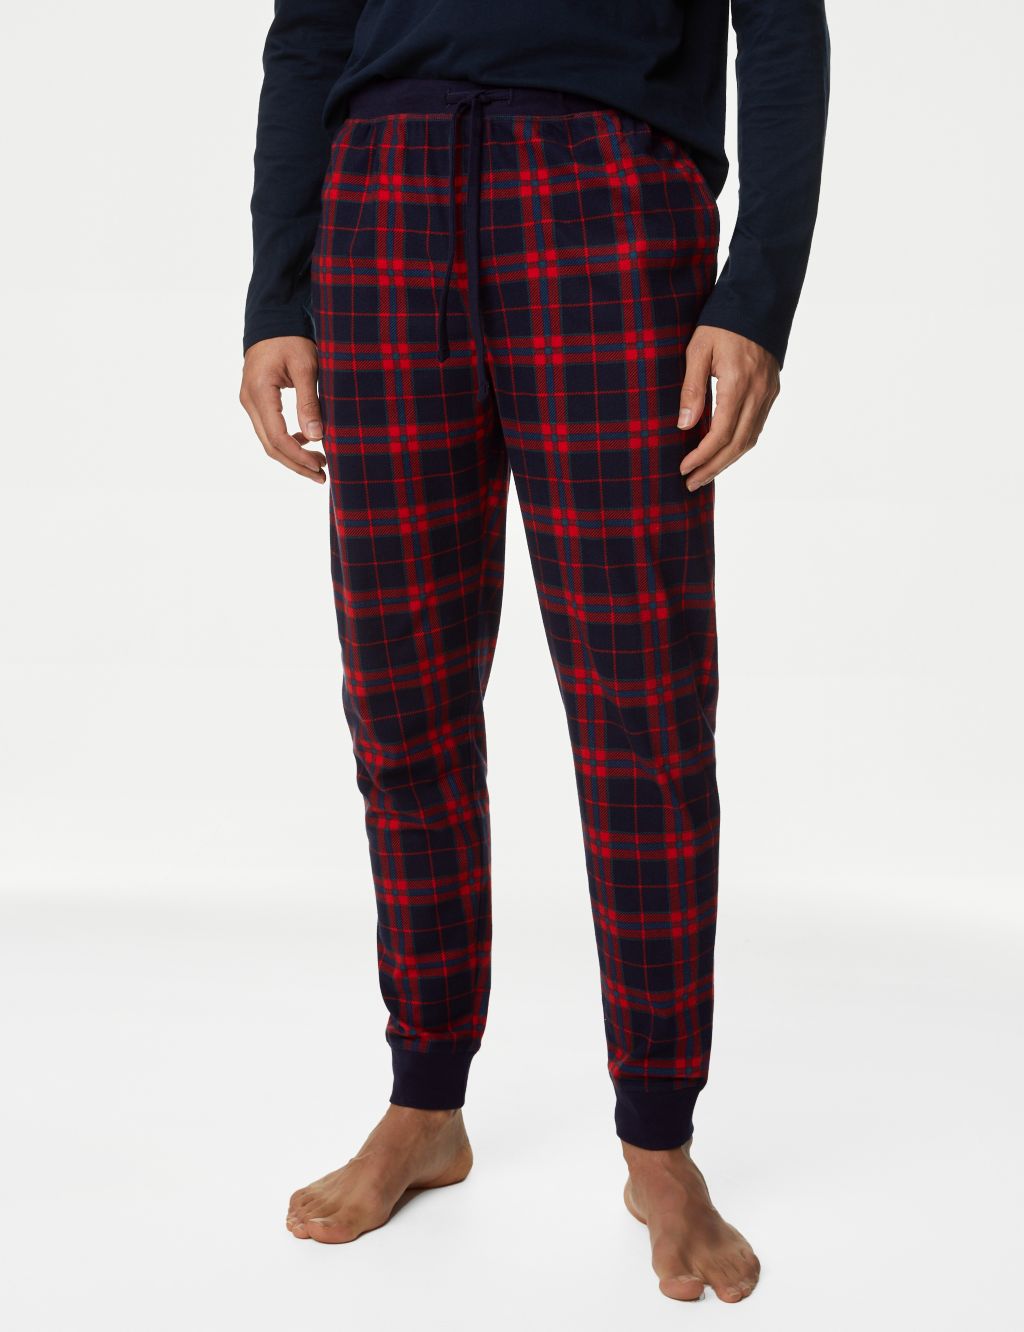 Supersoft Checked Loungewear Bottoms image 3